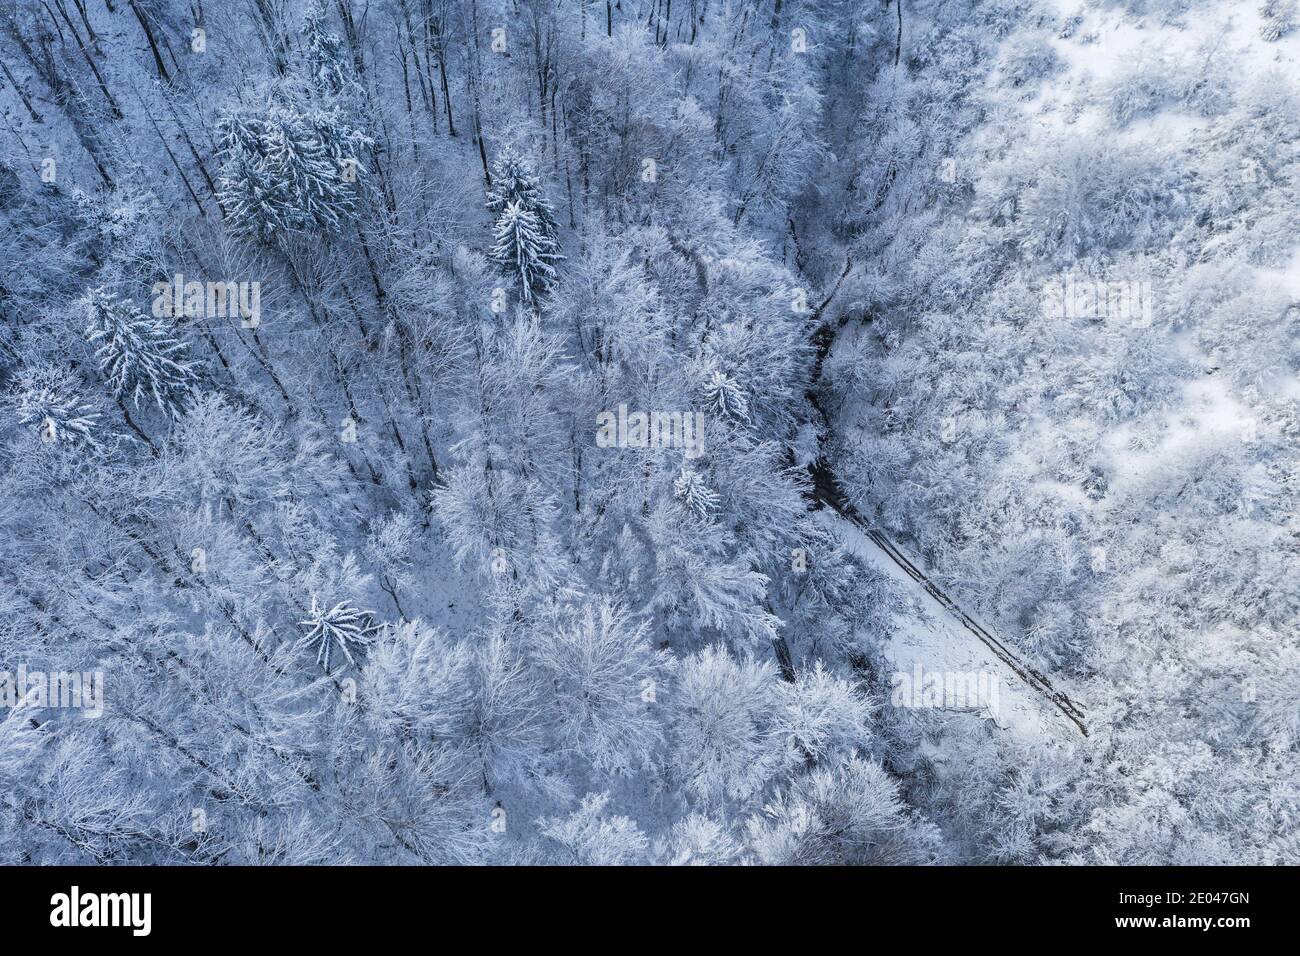 Frozen forest in winter from above Stock Photo